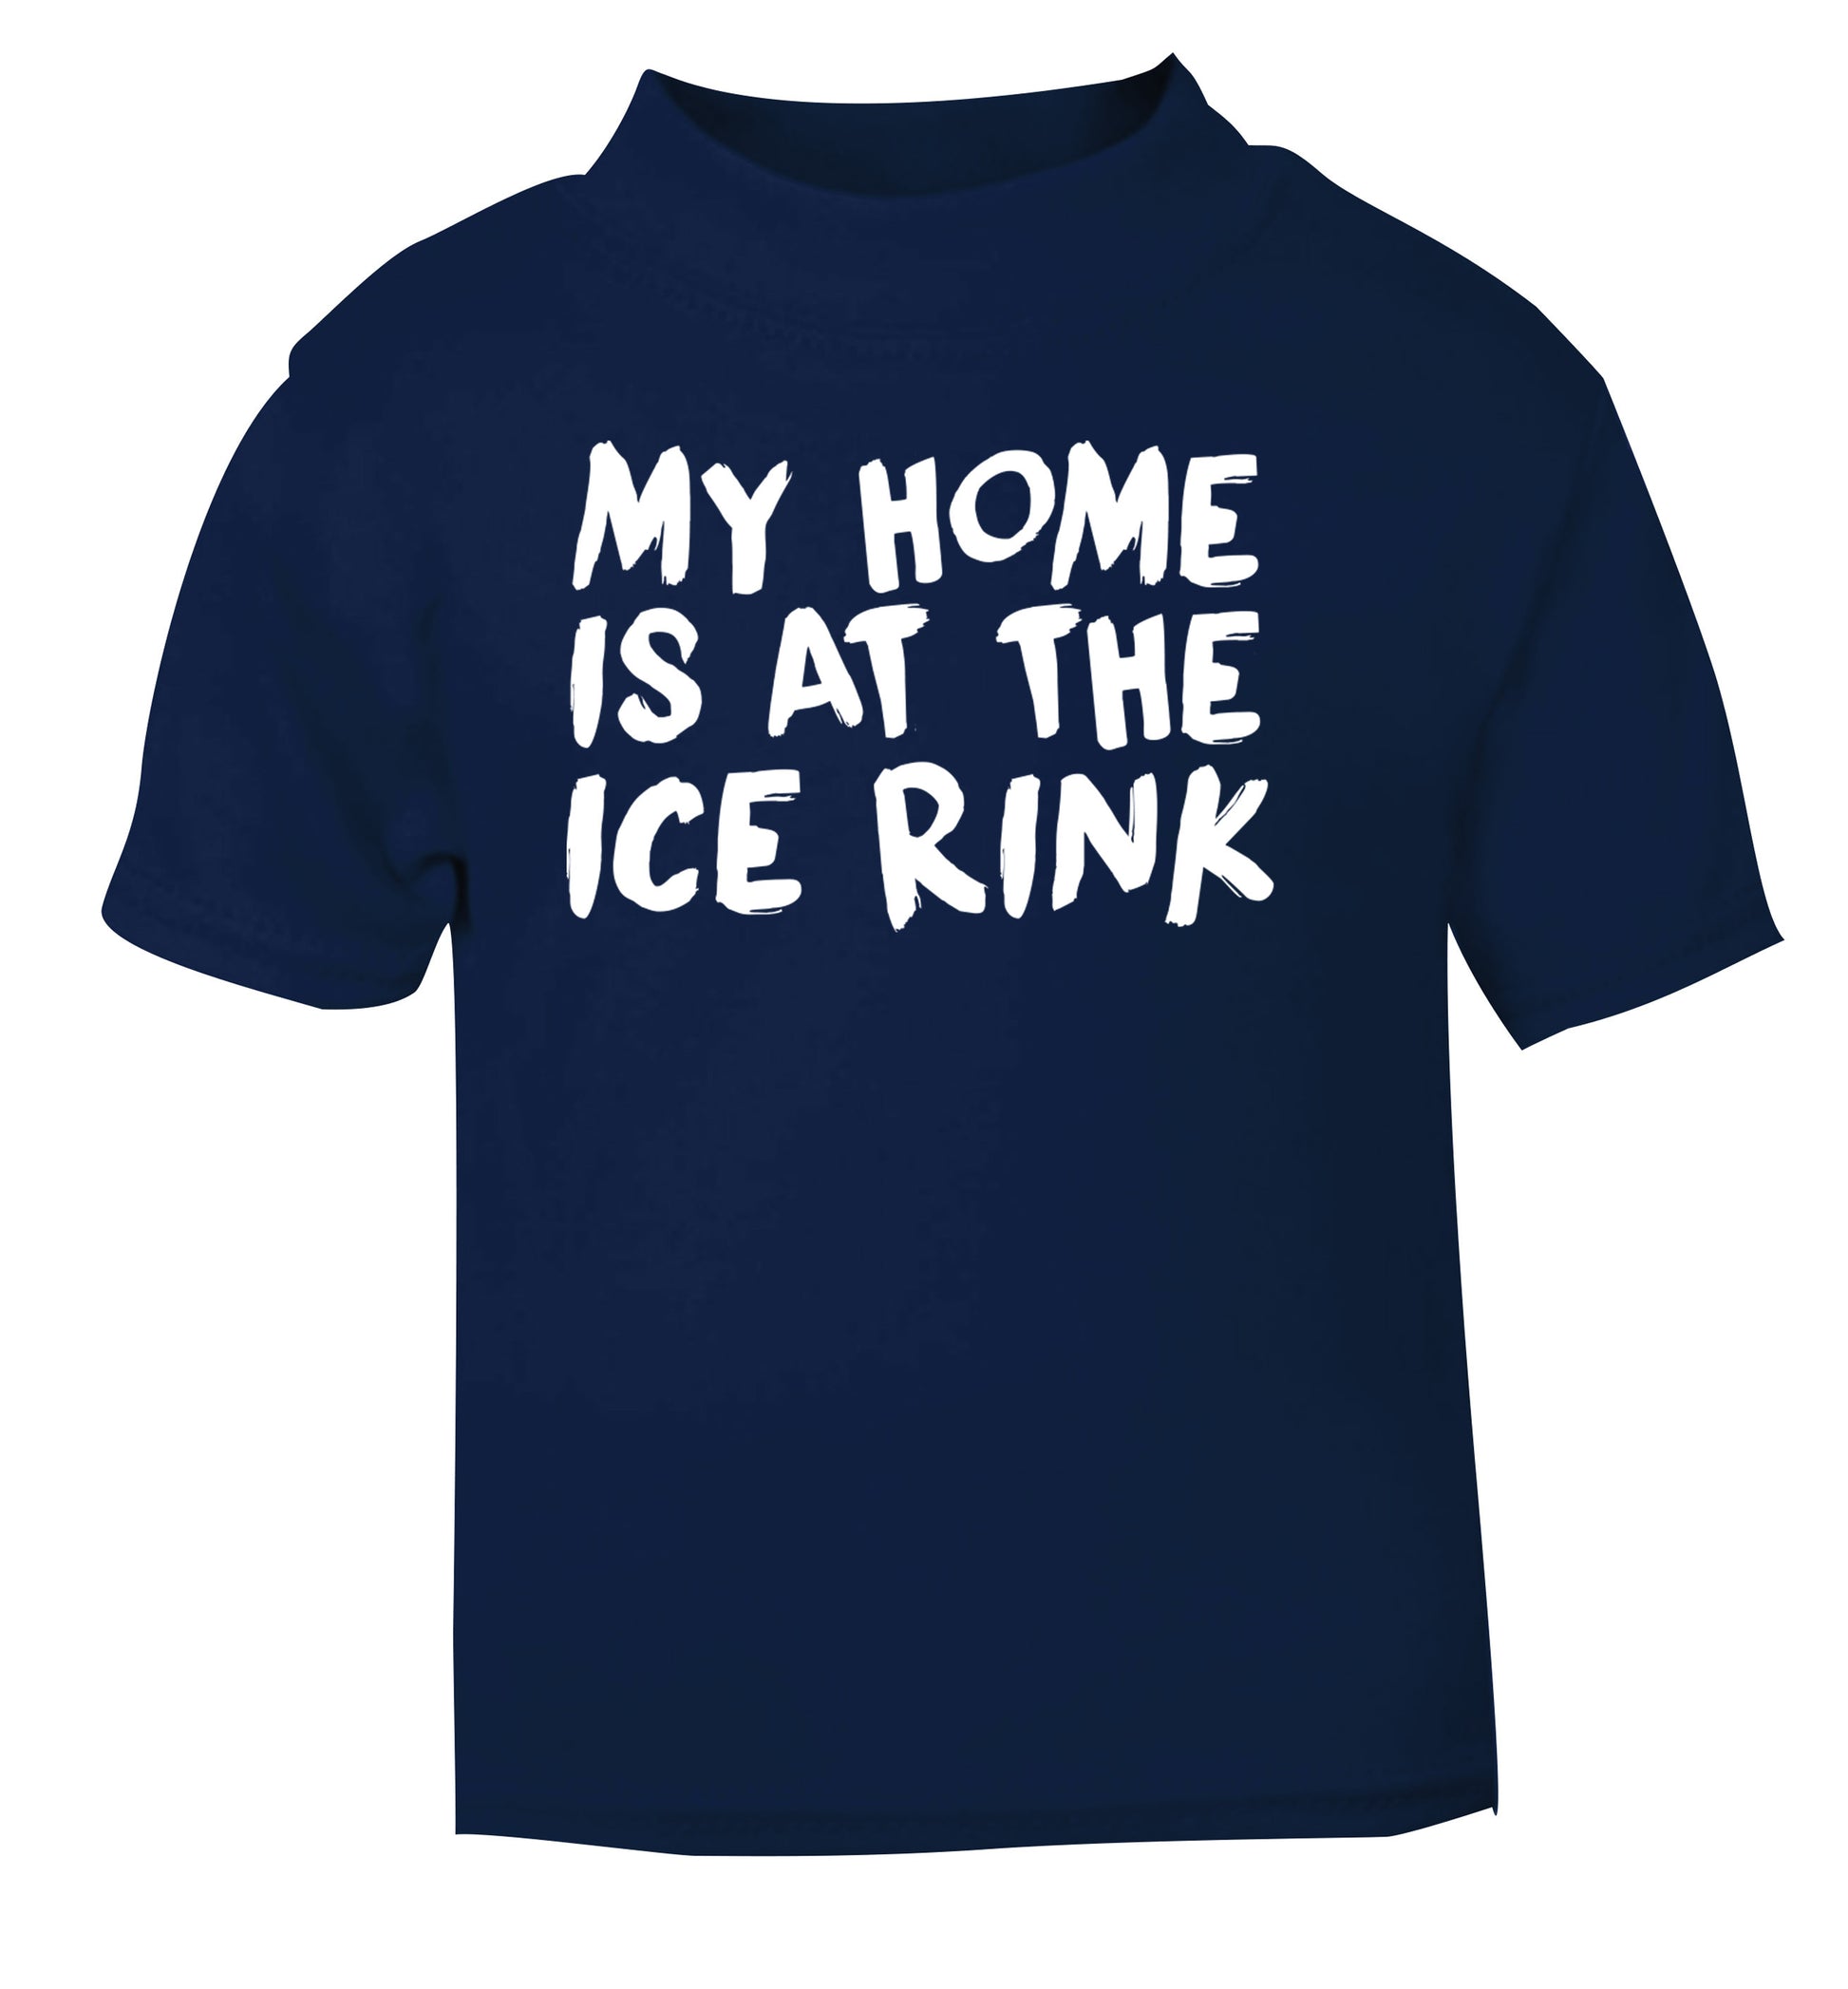 My home is at the ice rink navy Baby Toddler Tshirt 2 Years